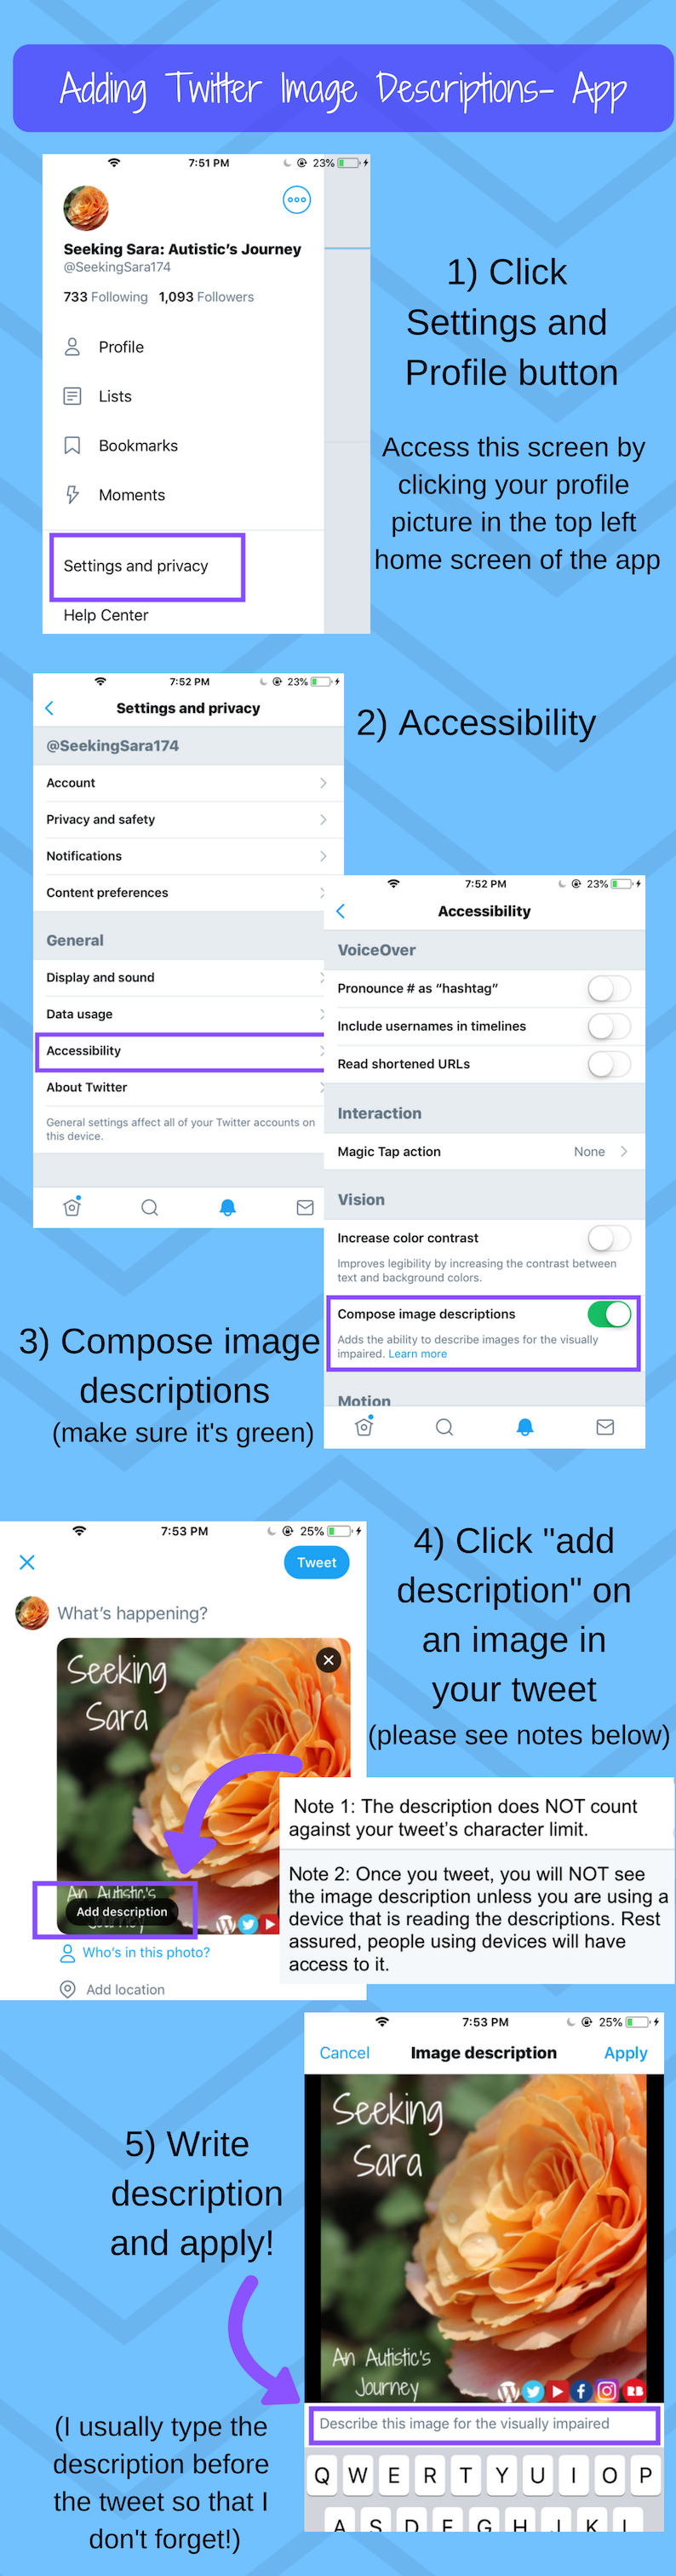 A visual guide detailing how to add alt image text to images on Twitter from a computer.